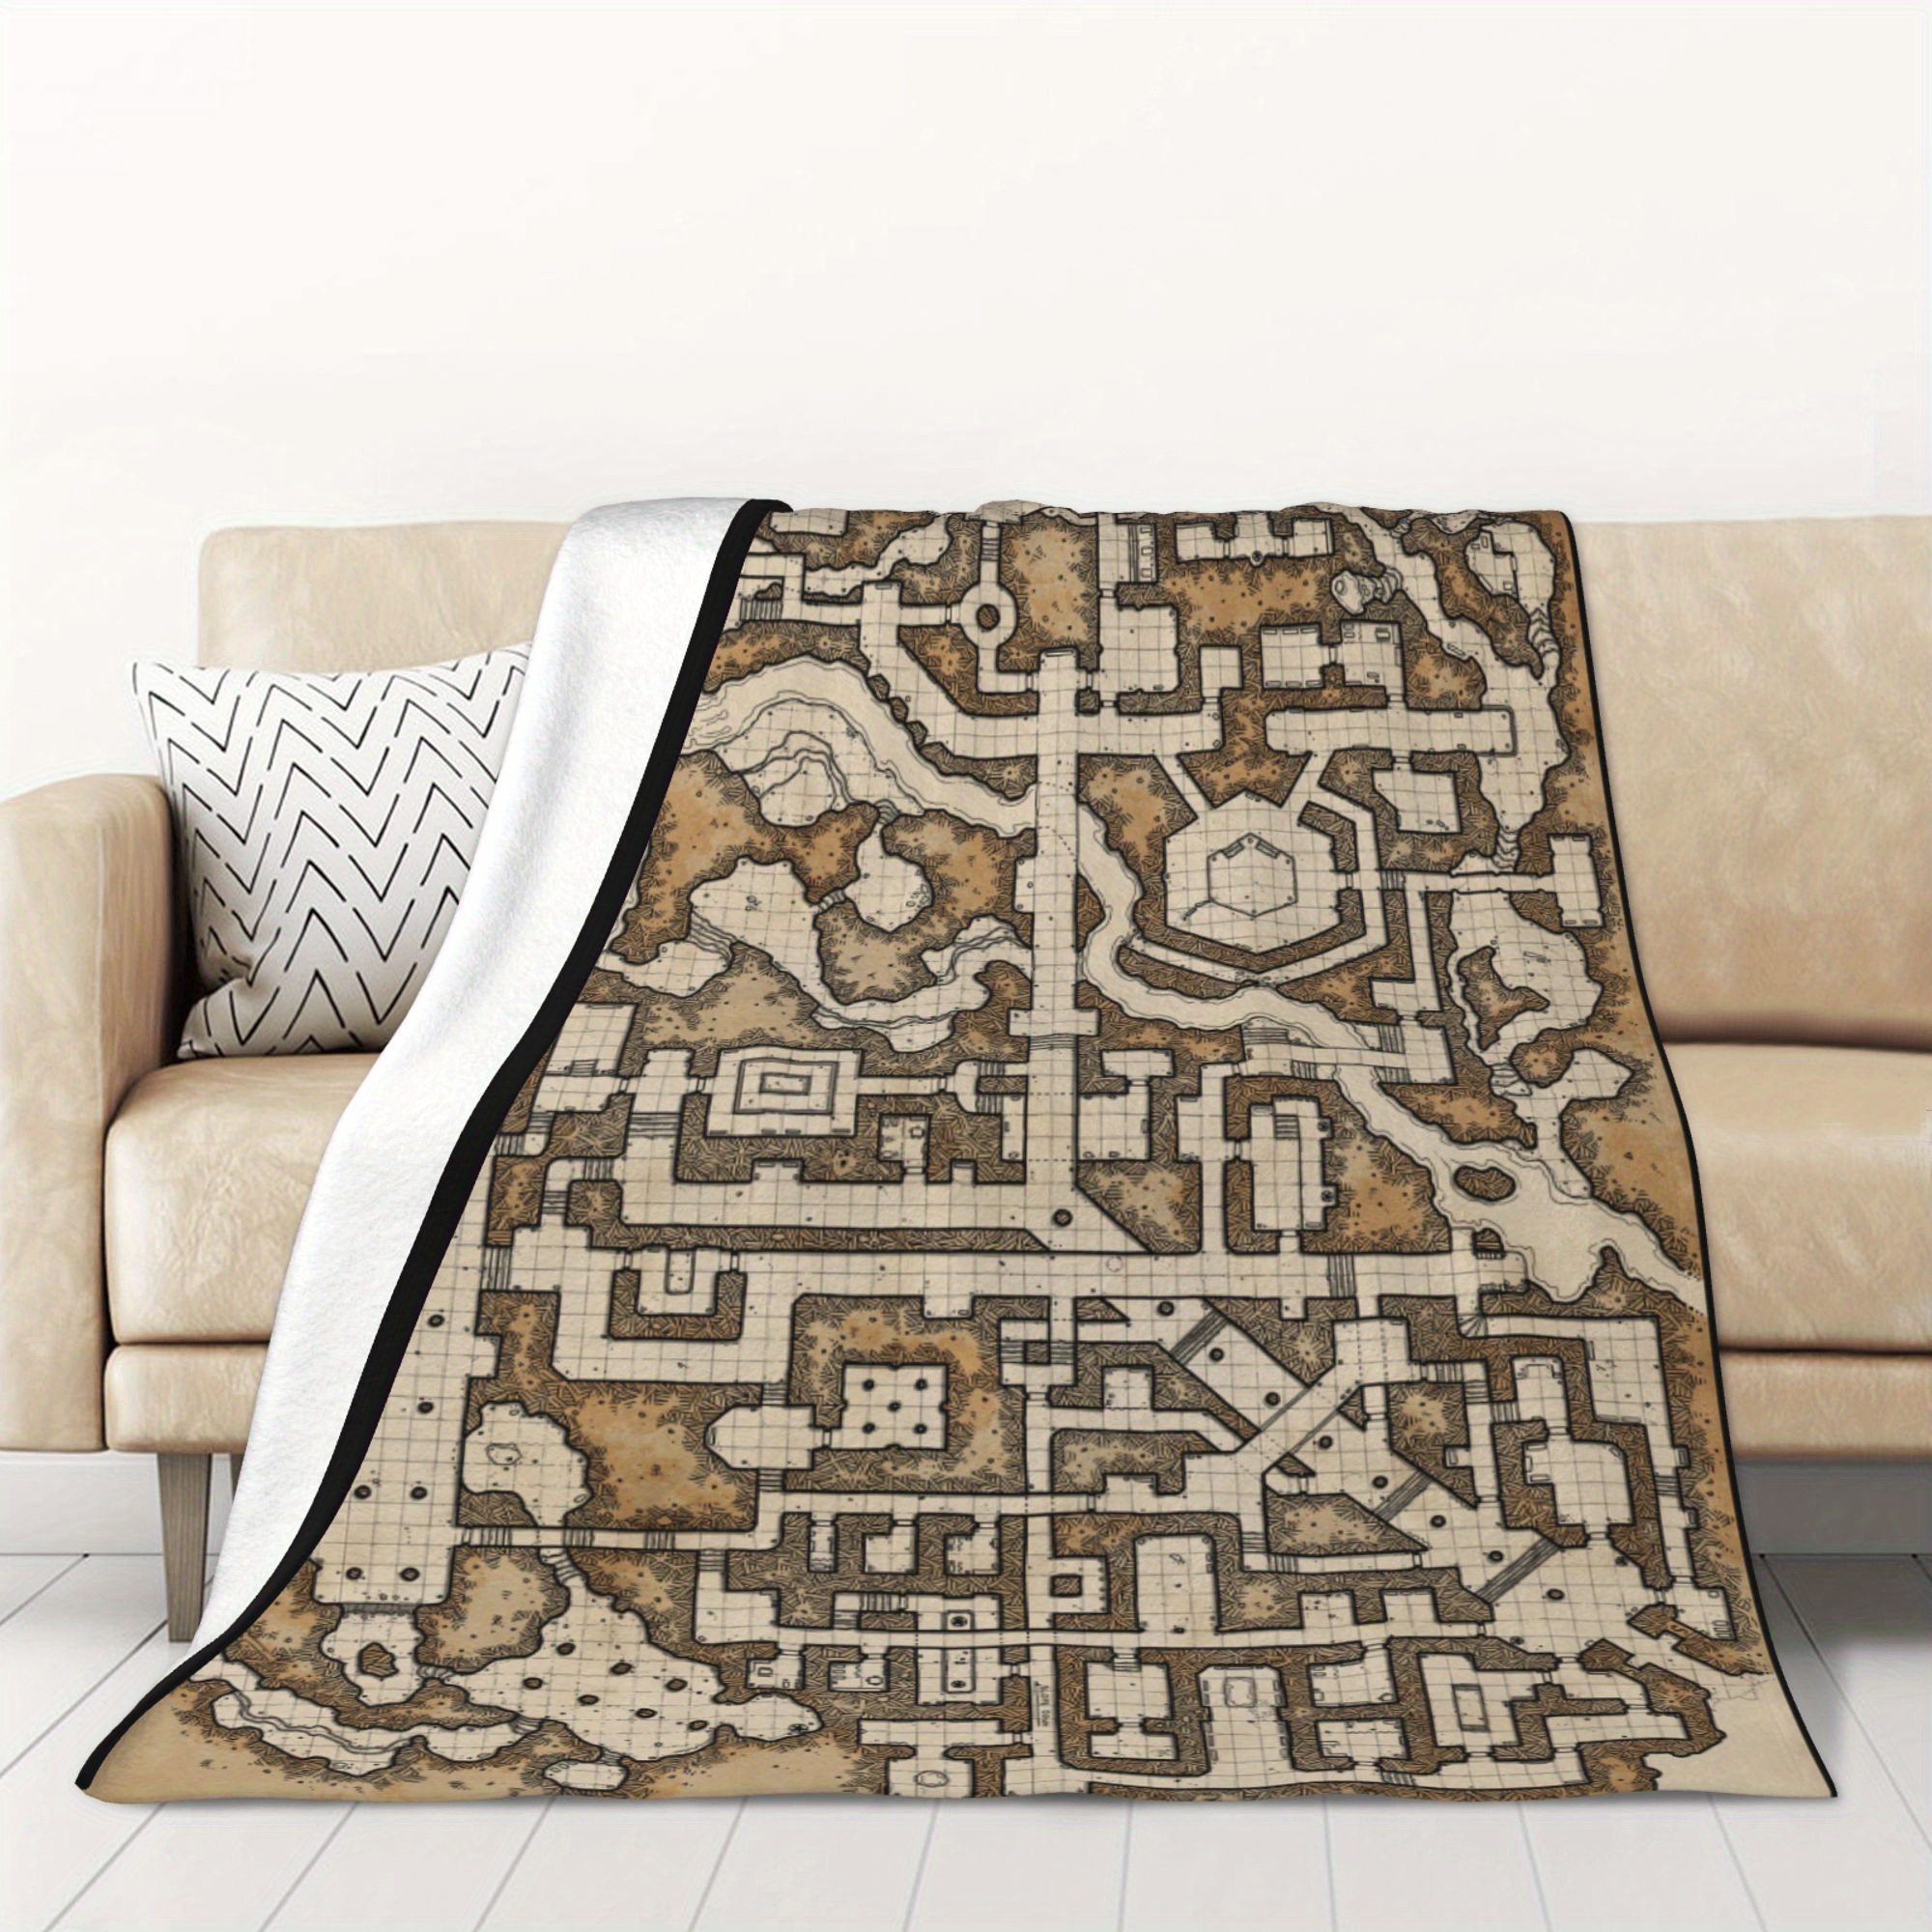 

Cozy Flannel Throw Blanket With Classic Game Map Design - Perfect For Couch, Bed, Office, And Travel - Ideal Gift For Gamers